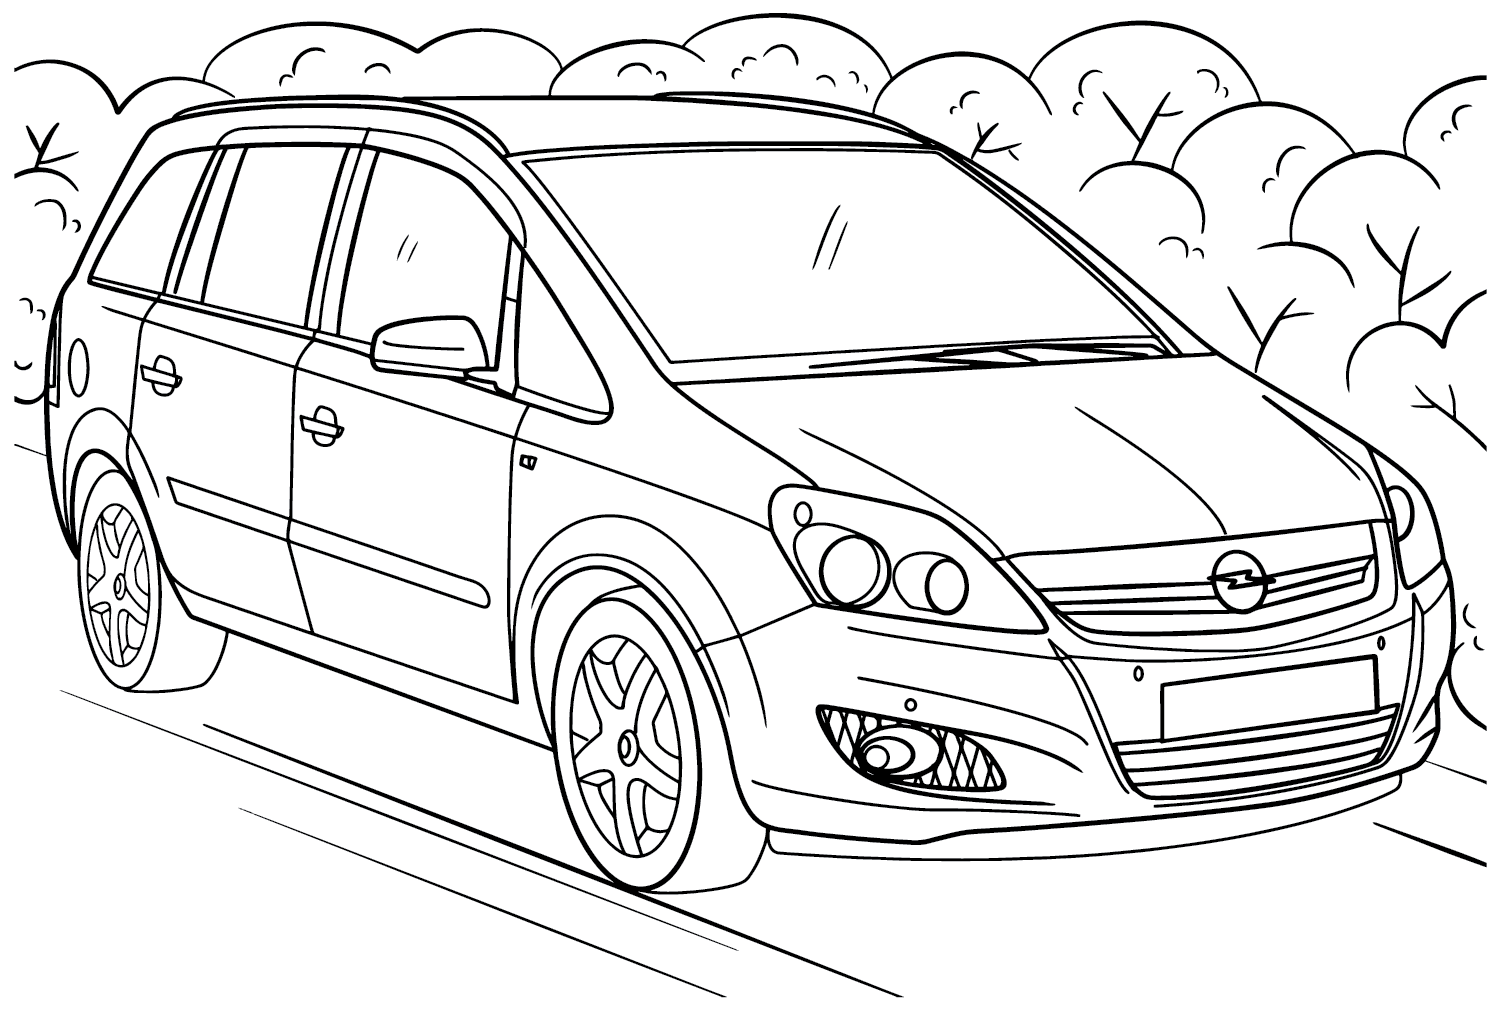 Opel Zafira Coloring Page from Opel